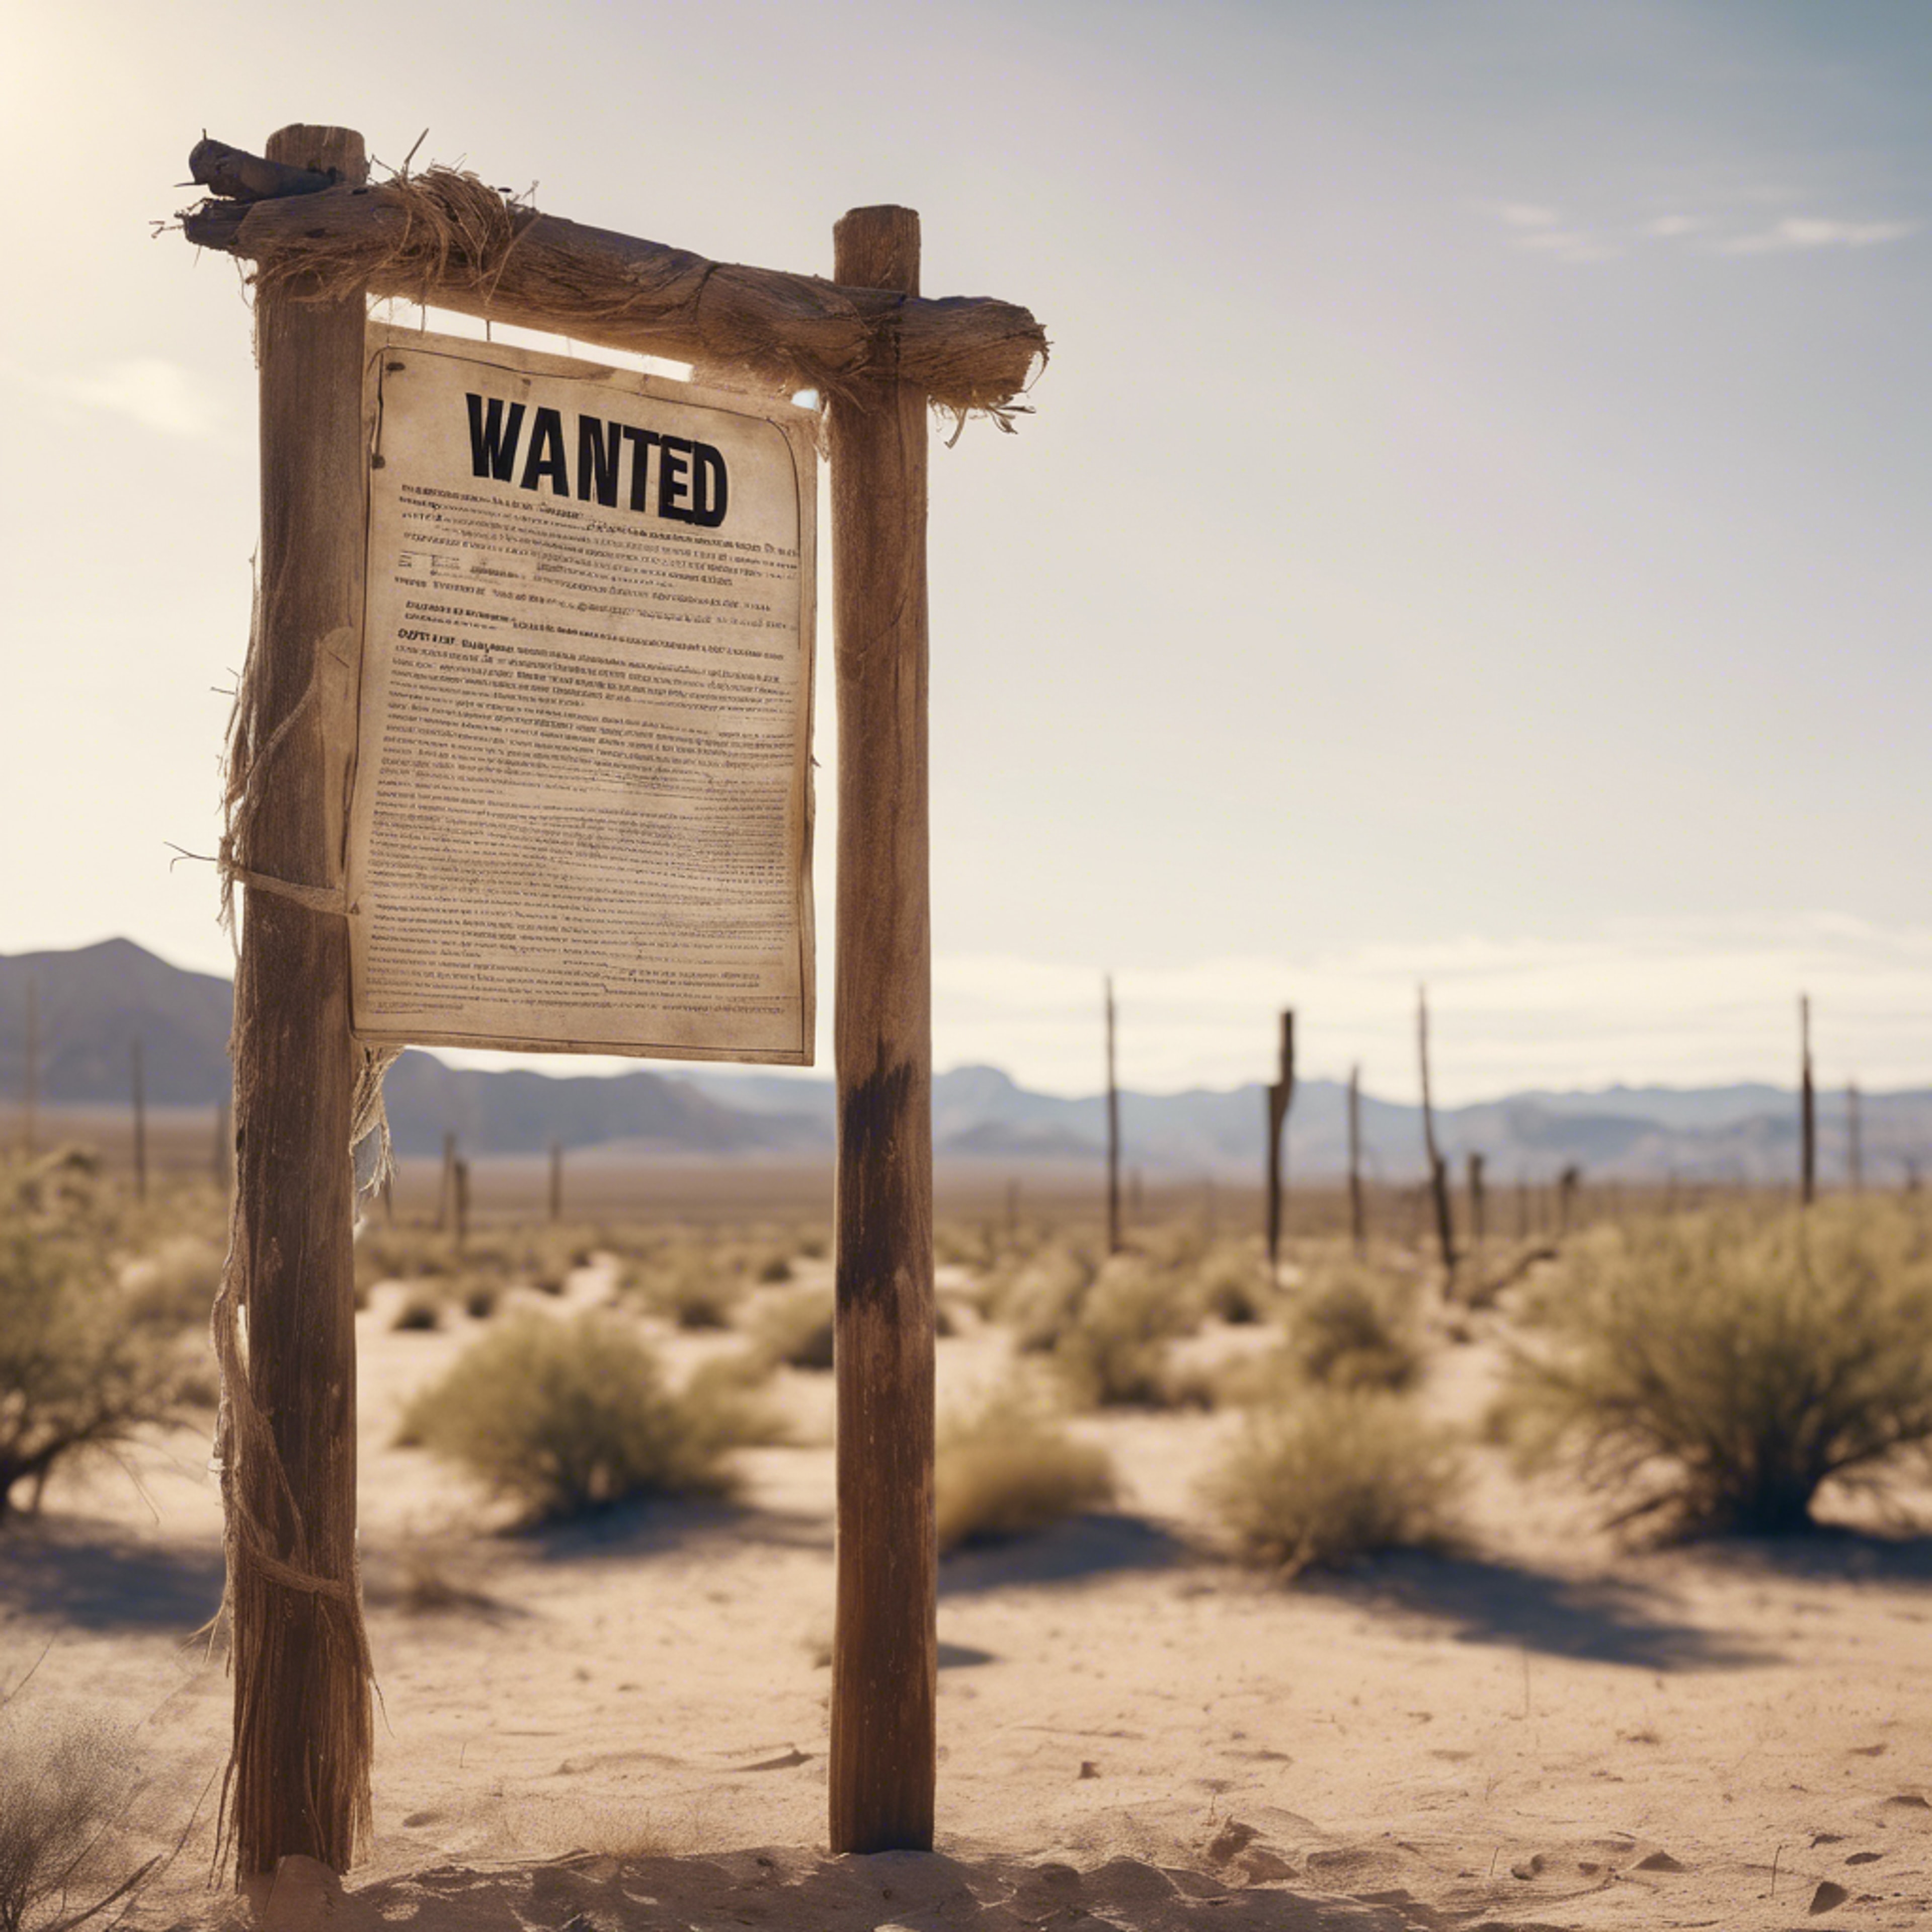 A wanted poster nailed to wooden post in a windy desert town, offering a reward in bold letters. Обои[1e032392f4784d5094da]